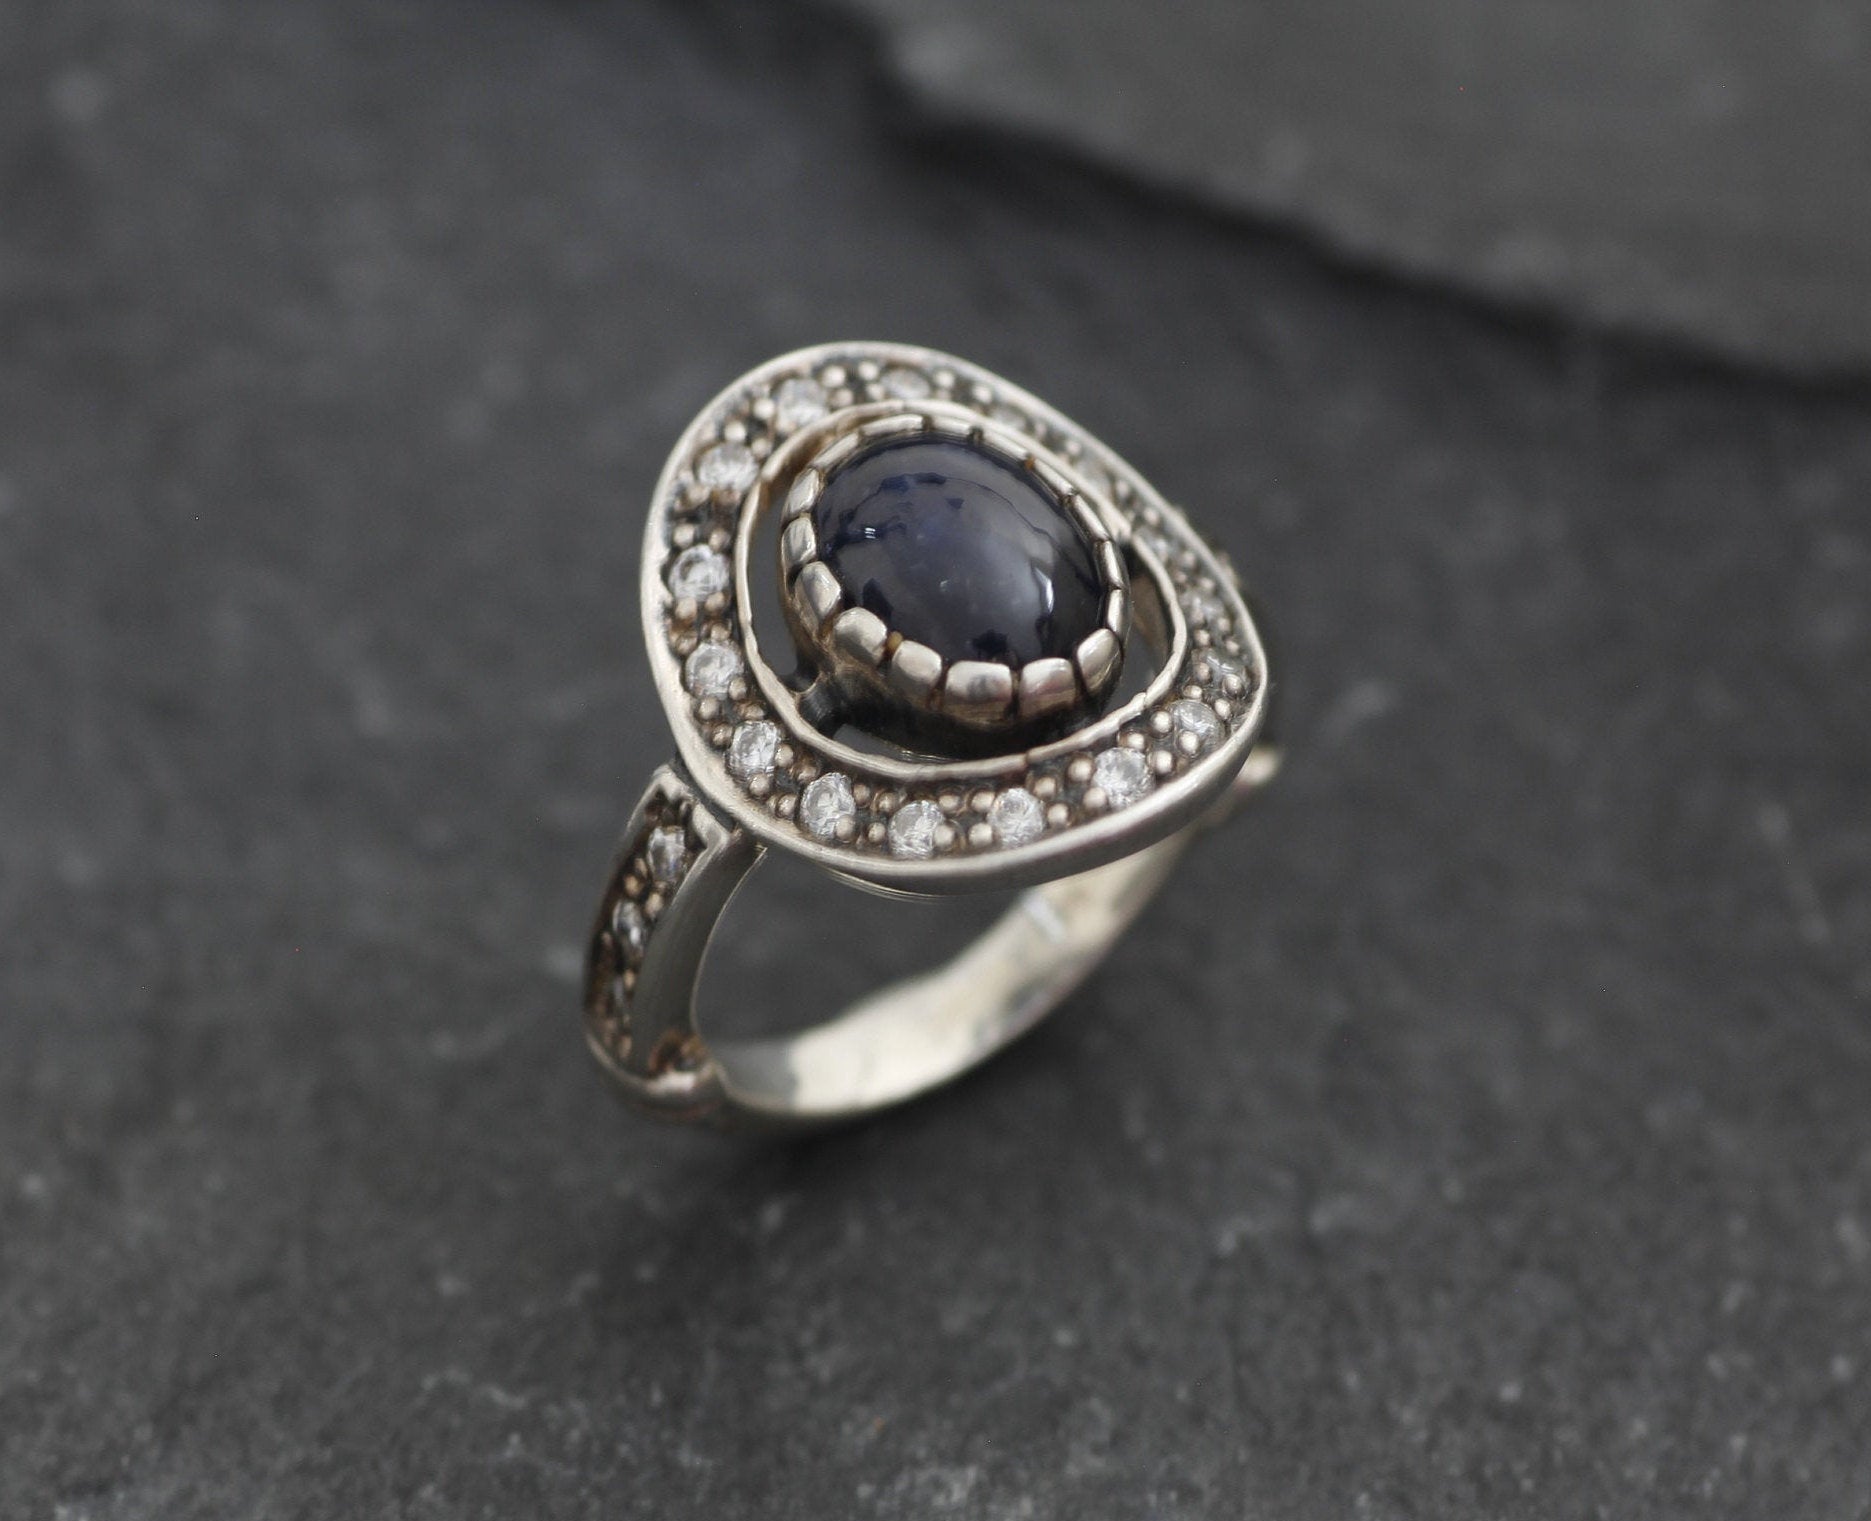 Antique Sapphire Ring, Natural Sapphire, Vintage Ring, September Birthstone, Blue Sapphire Ring, 2 Carat Ring, Oval Ring, Solid Silver Ring